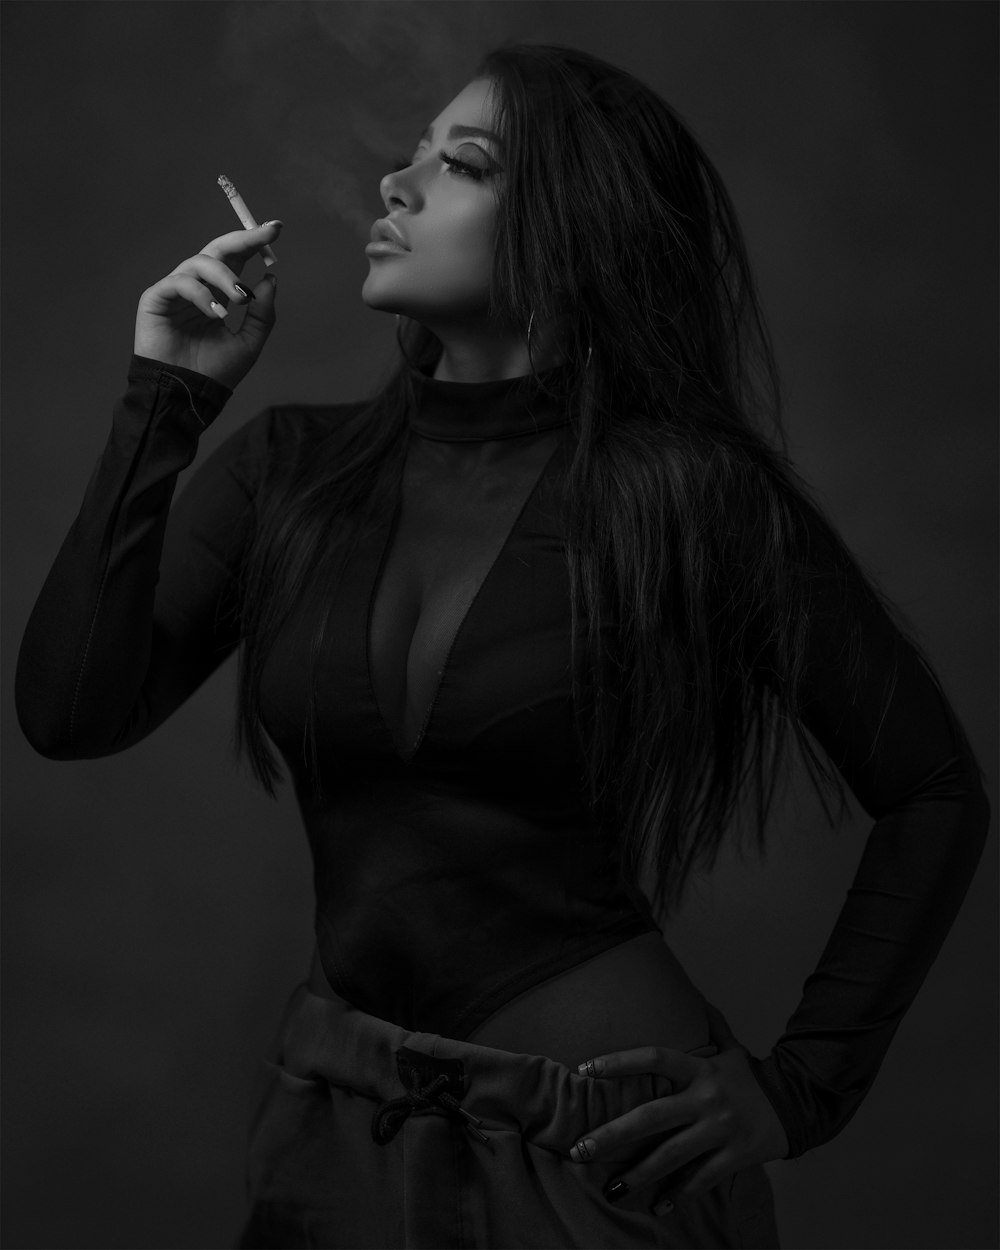 woman in black leather jacket smoking cigarette